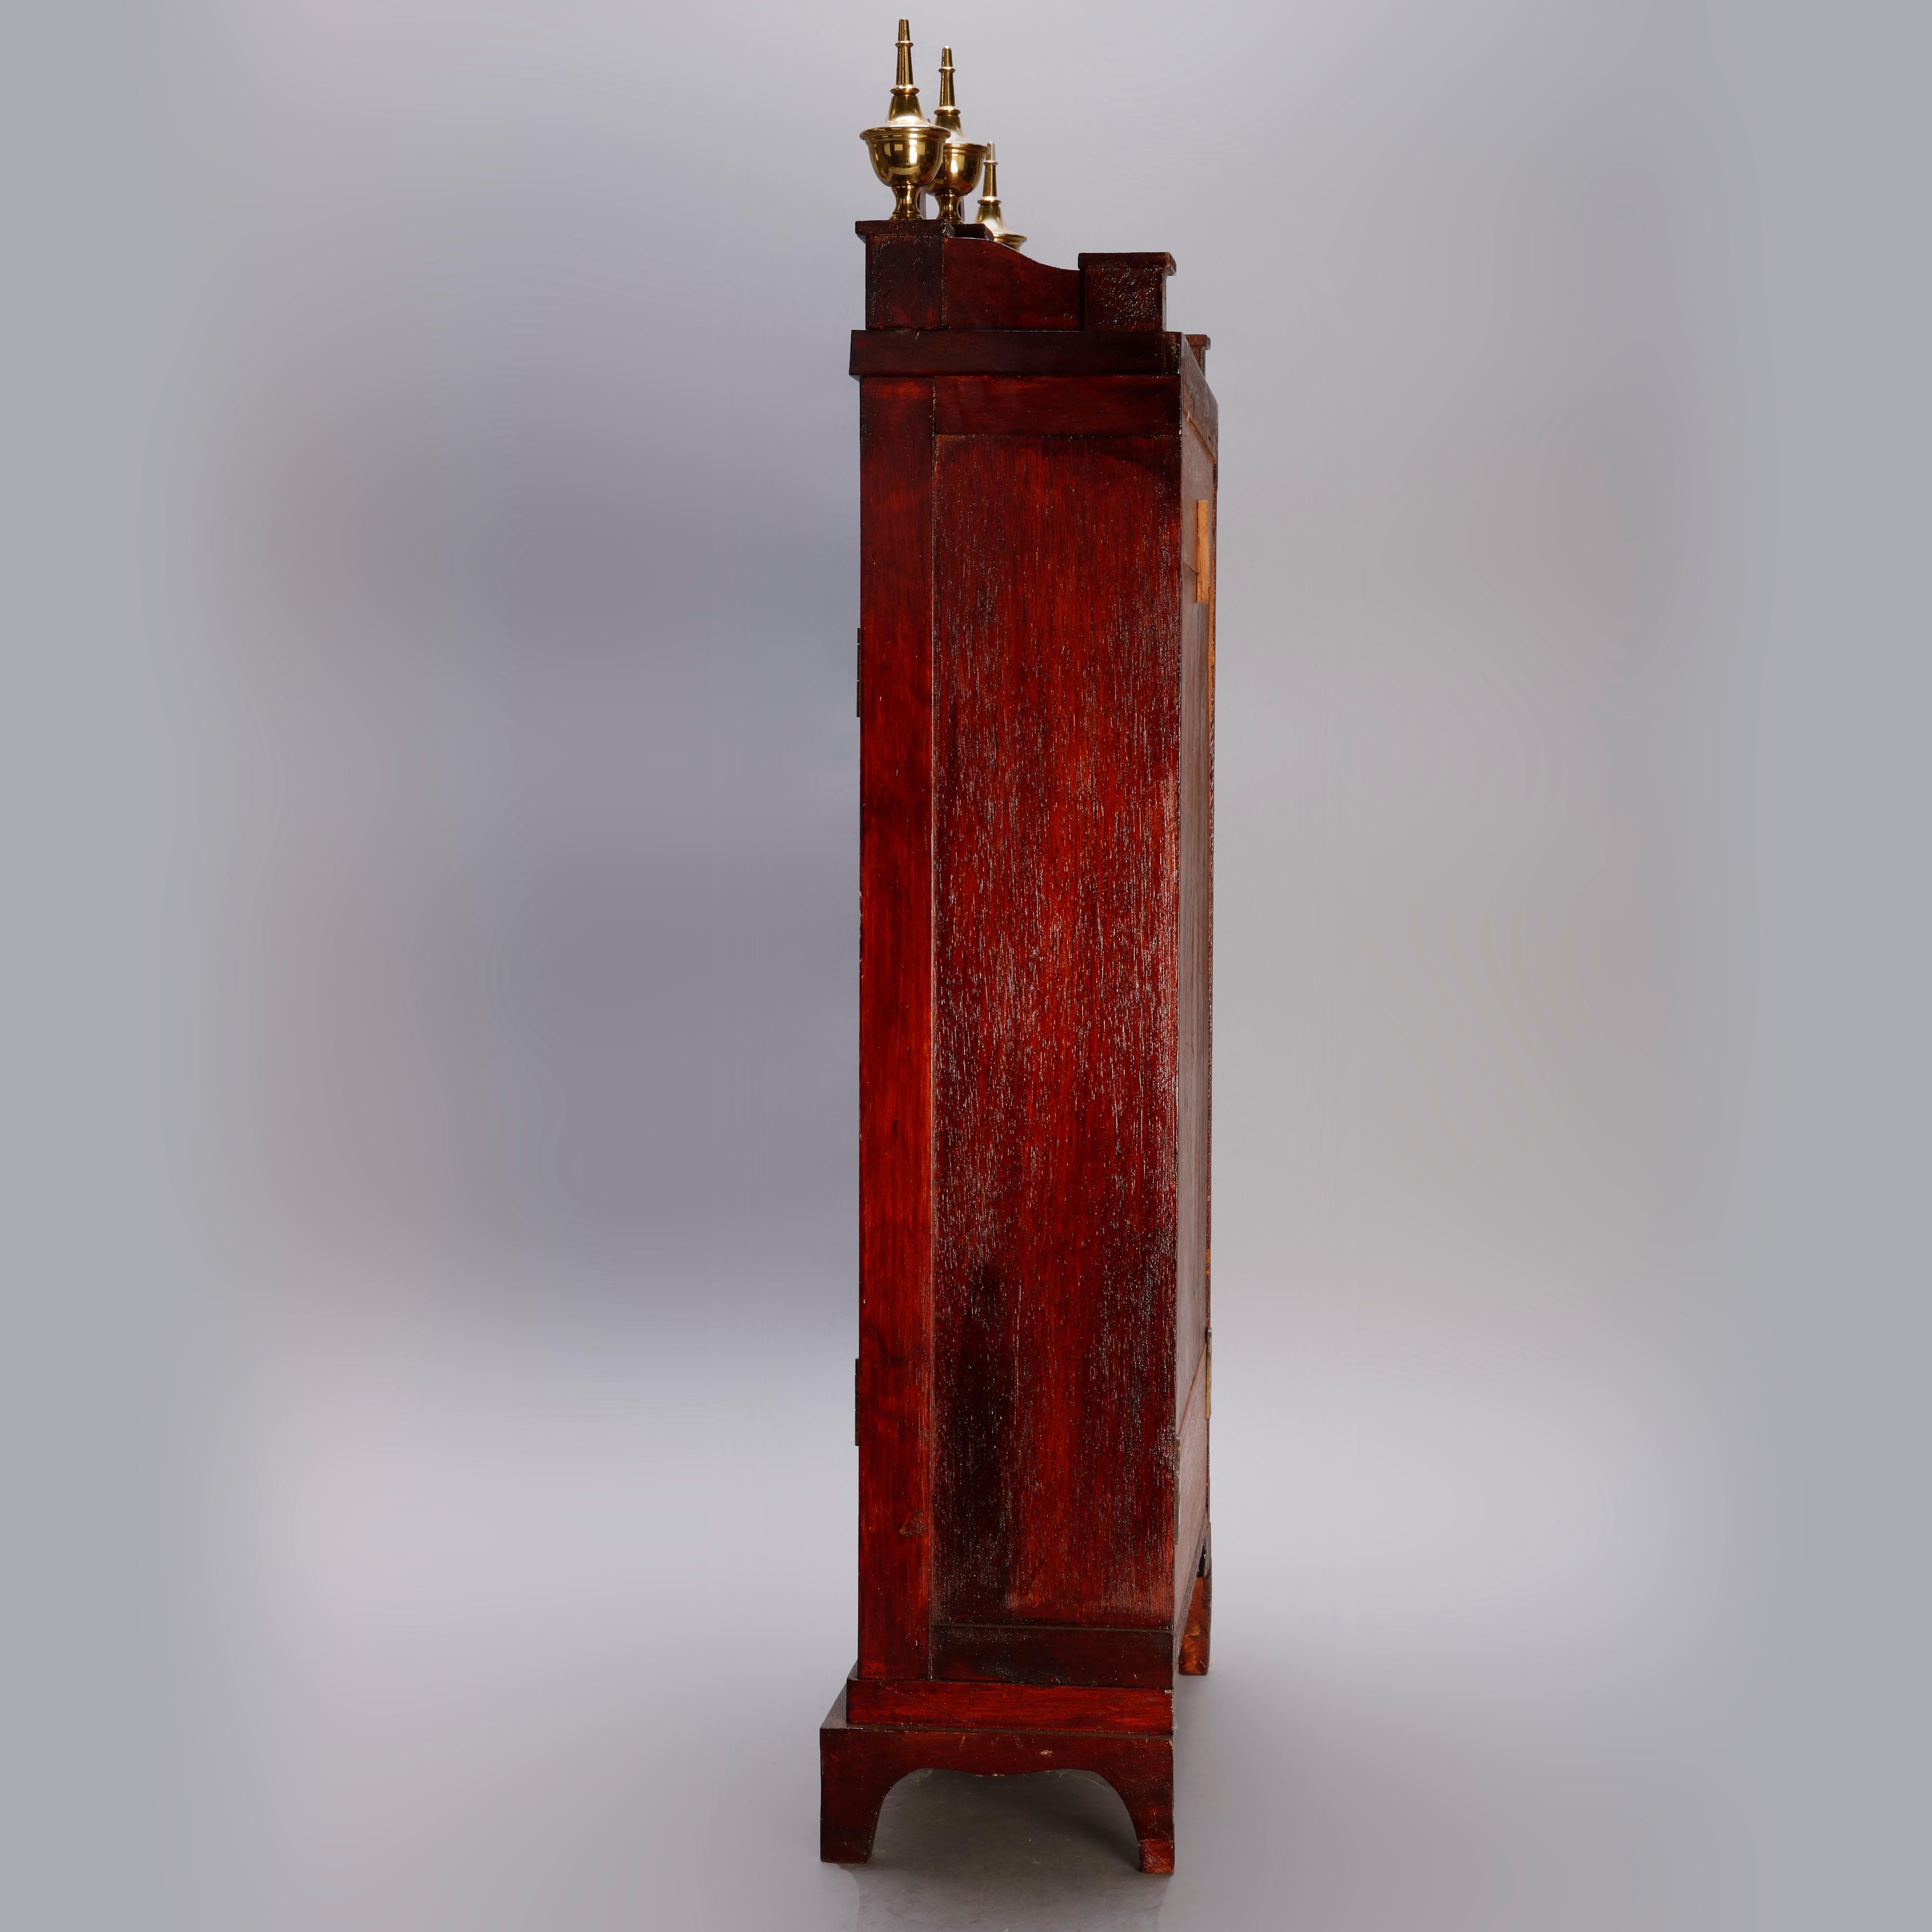 An antique Eli Terry School Pillar & Scroll mantel clock offers mahogany case with broken arch crest having central and flanking finials, face with Roman numerals and lower mirror. Unknown working order, 20th century

Measures: 31.68